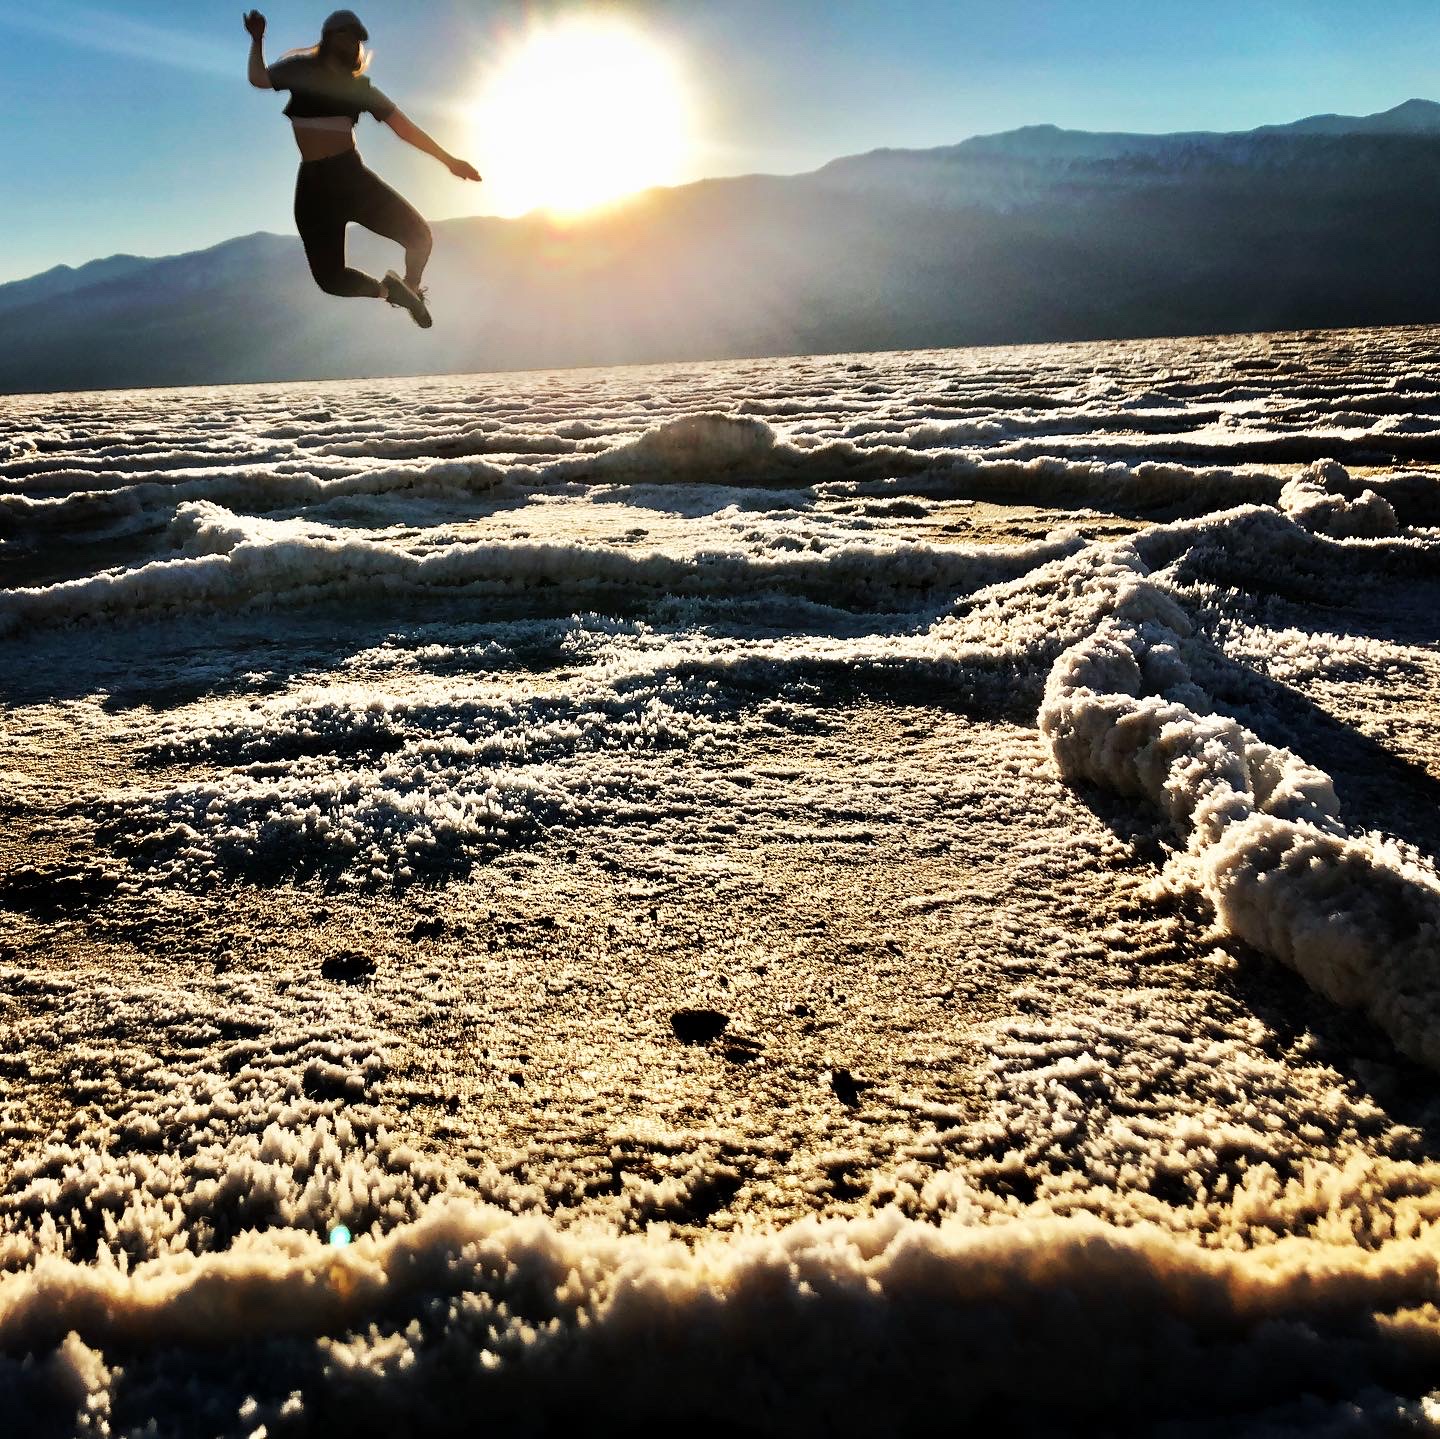 A woman leaps into the air. The foreground is a salt flat with polygon shapes, and a setting sun and mountains are in the background.